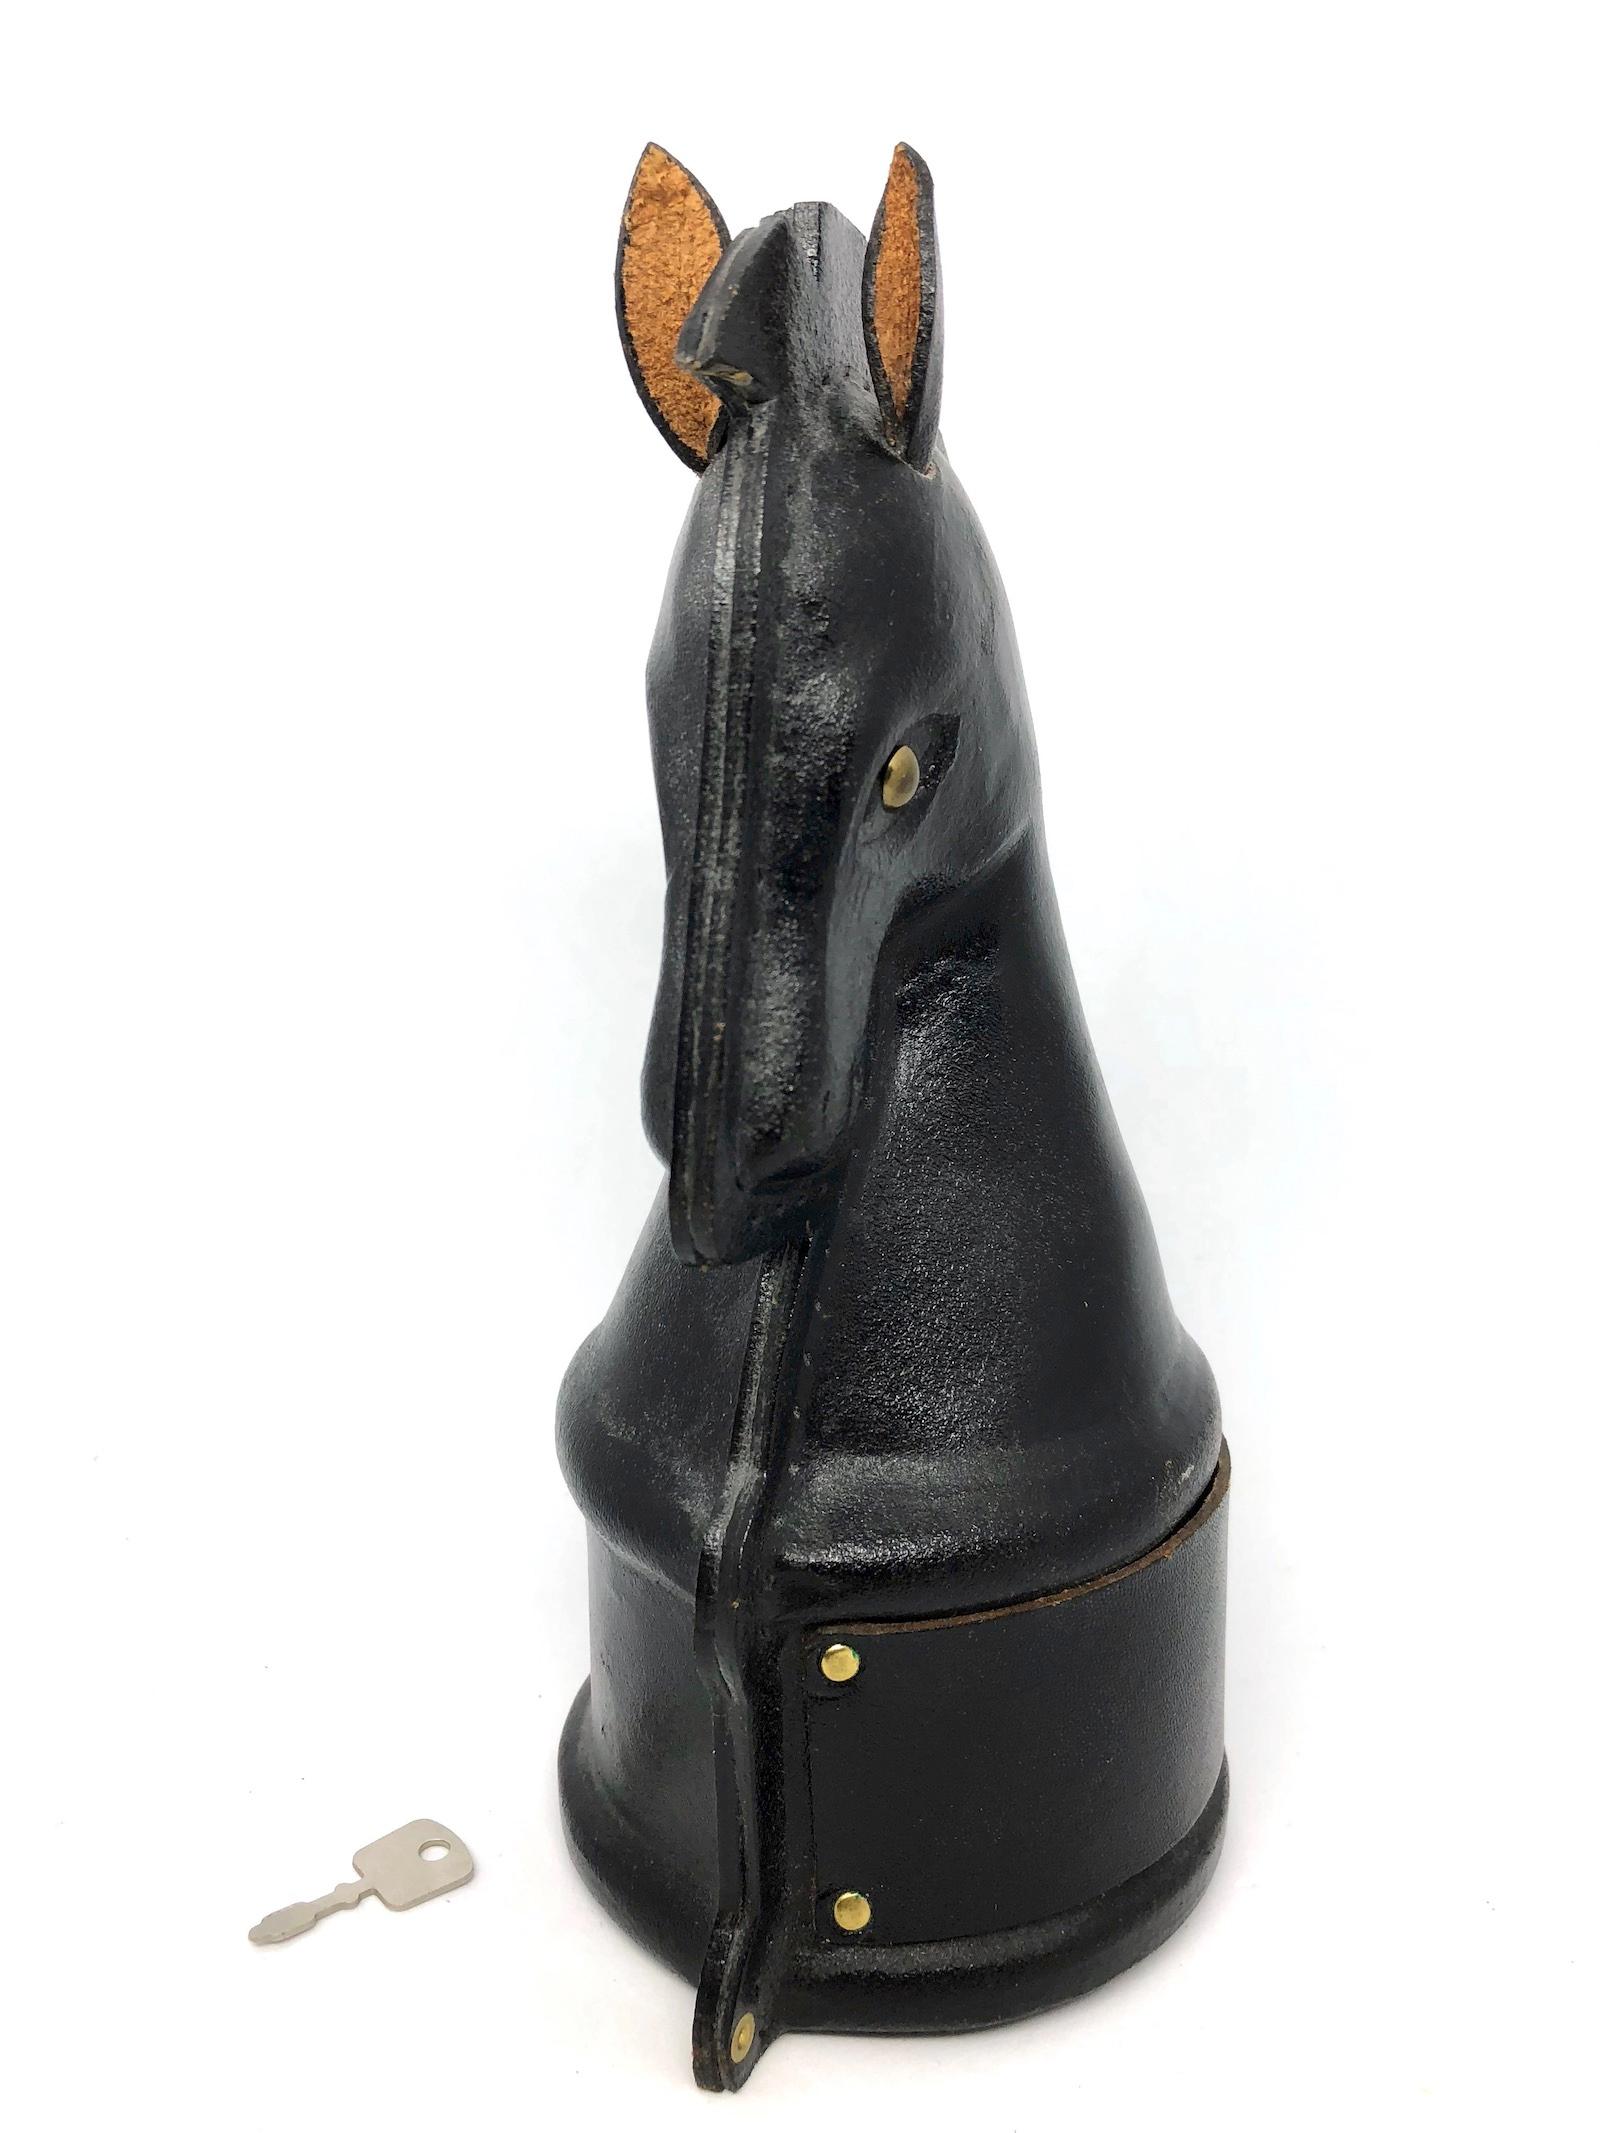 Metal Horse Money Box Piggy Bank Made of Leather Mid-Century Modern, 1970s